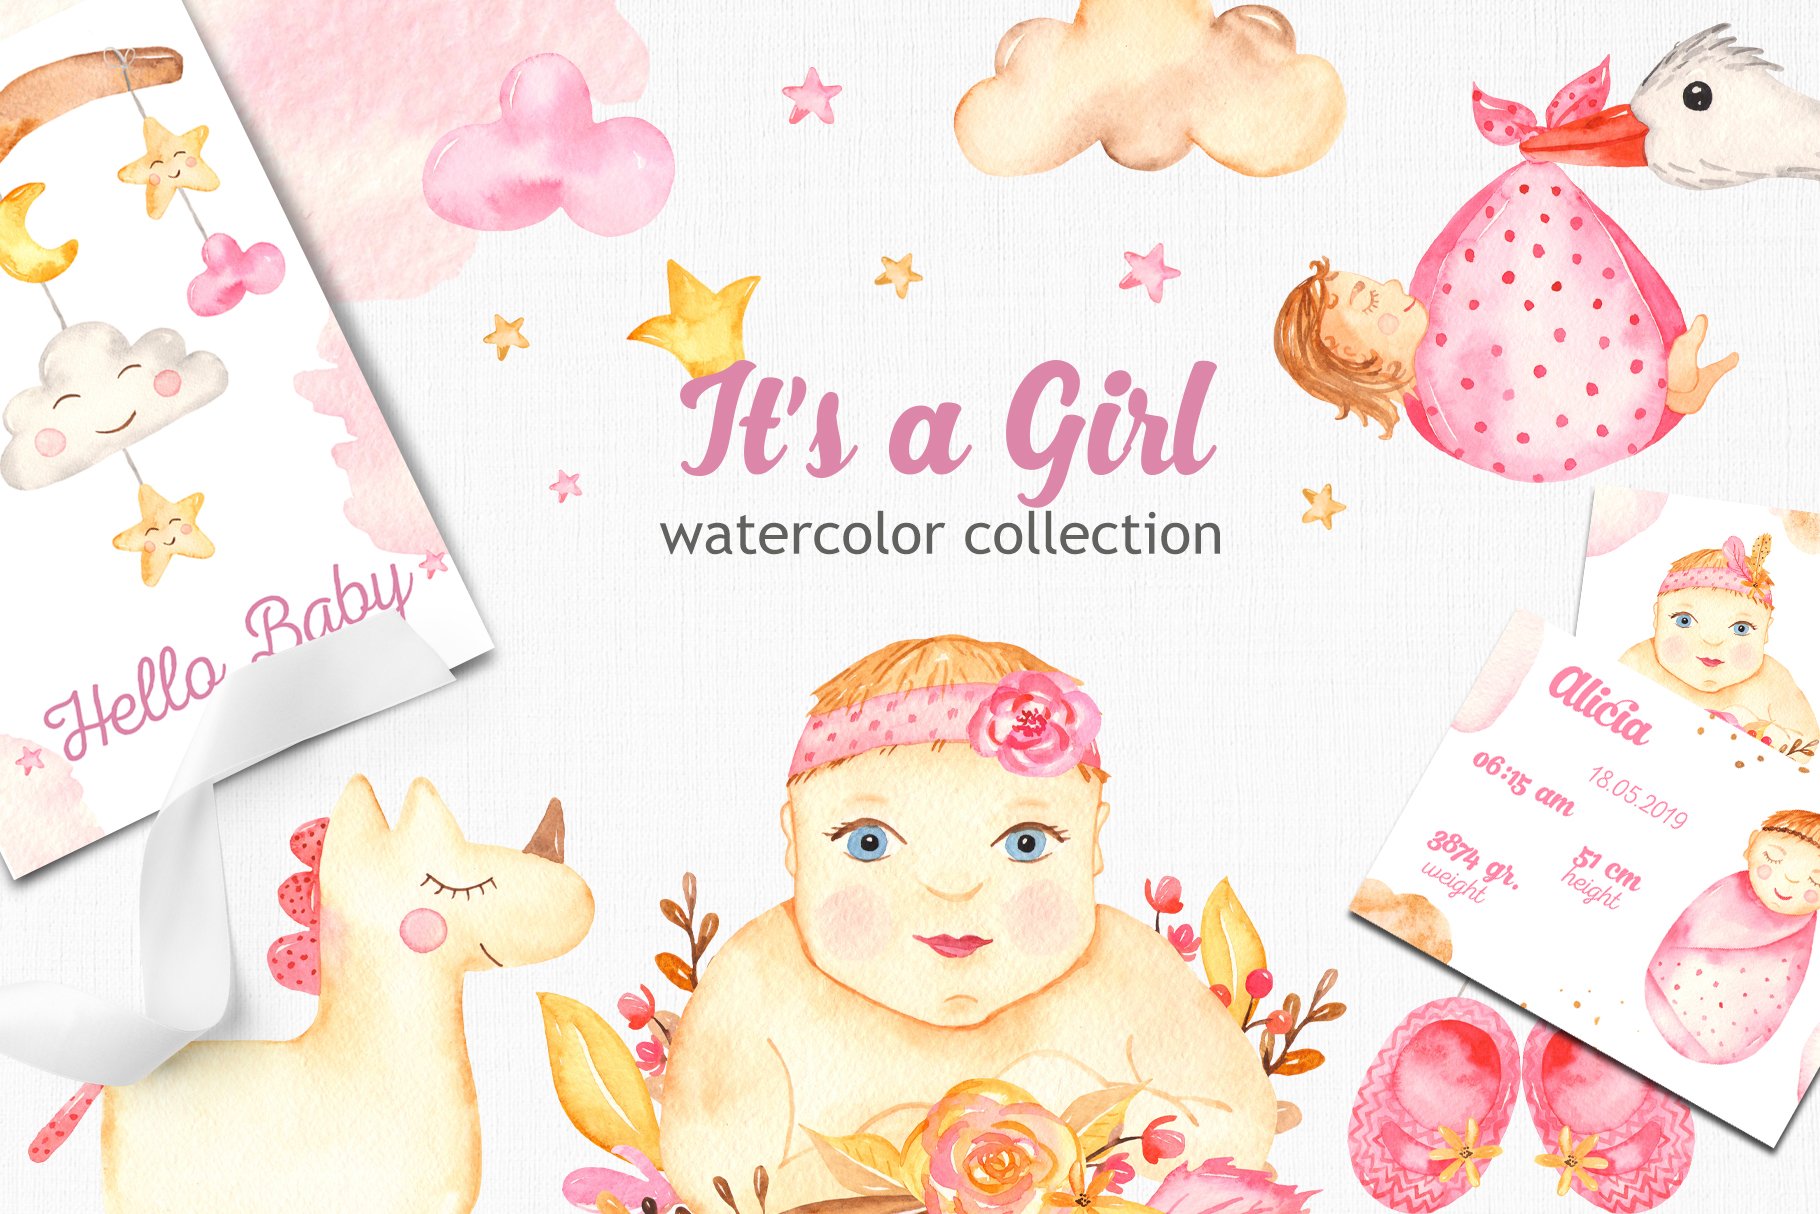 It’s a girl Watercolor collection cover image.